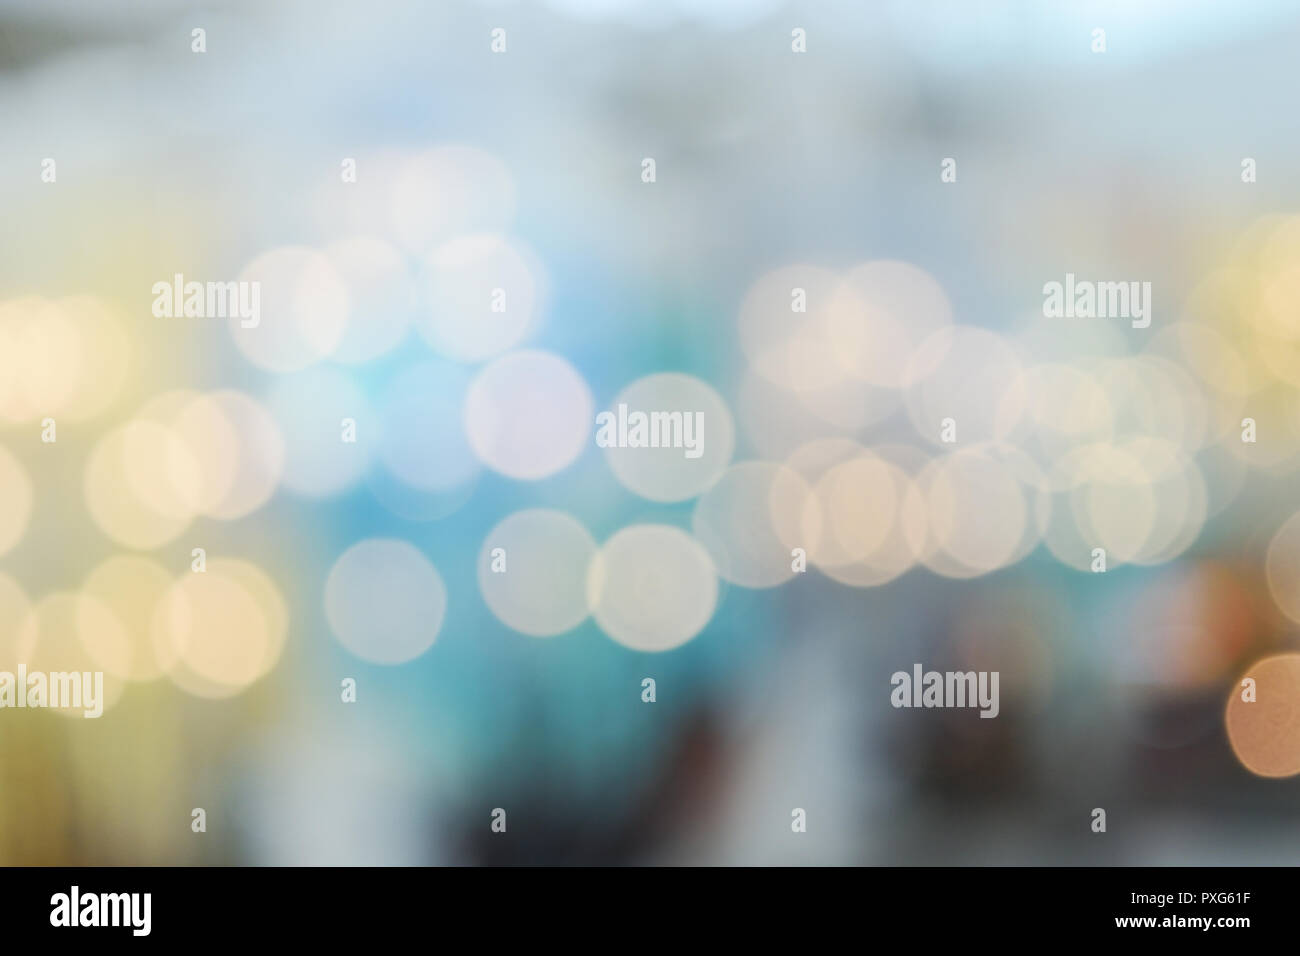 Bokeh from indoor lighting, Colorful light circles spread on blue with yellow and green background for the celebration of the holiday season Stock Photo